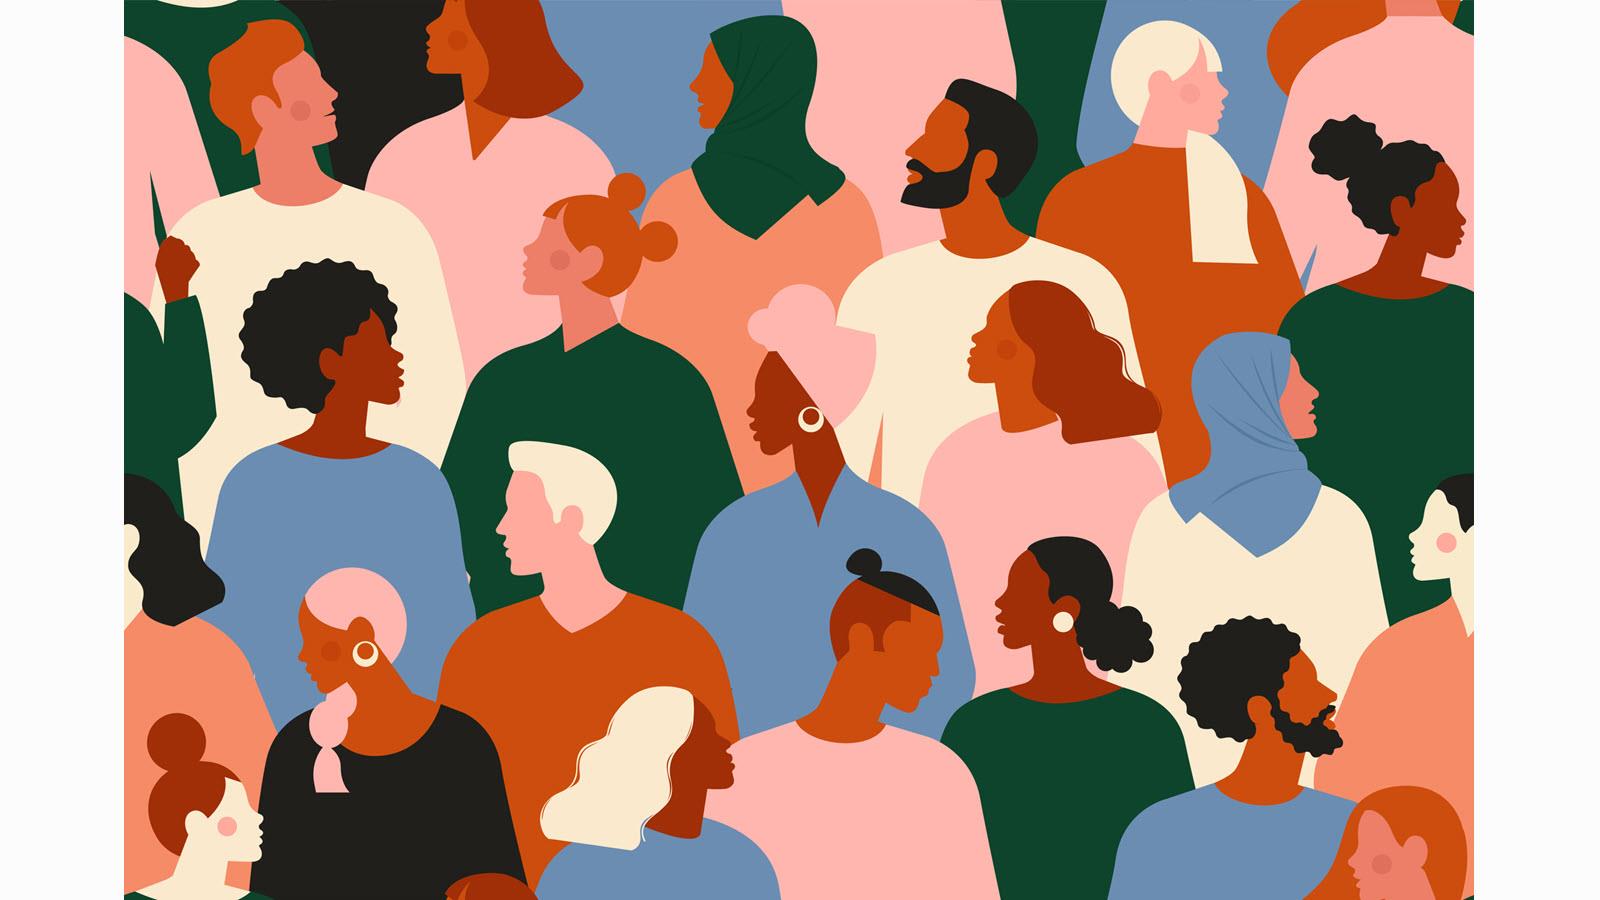 illustration featuring many people of different races and ethnicities